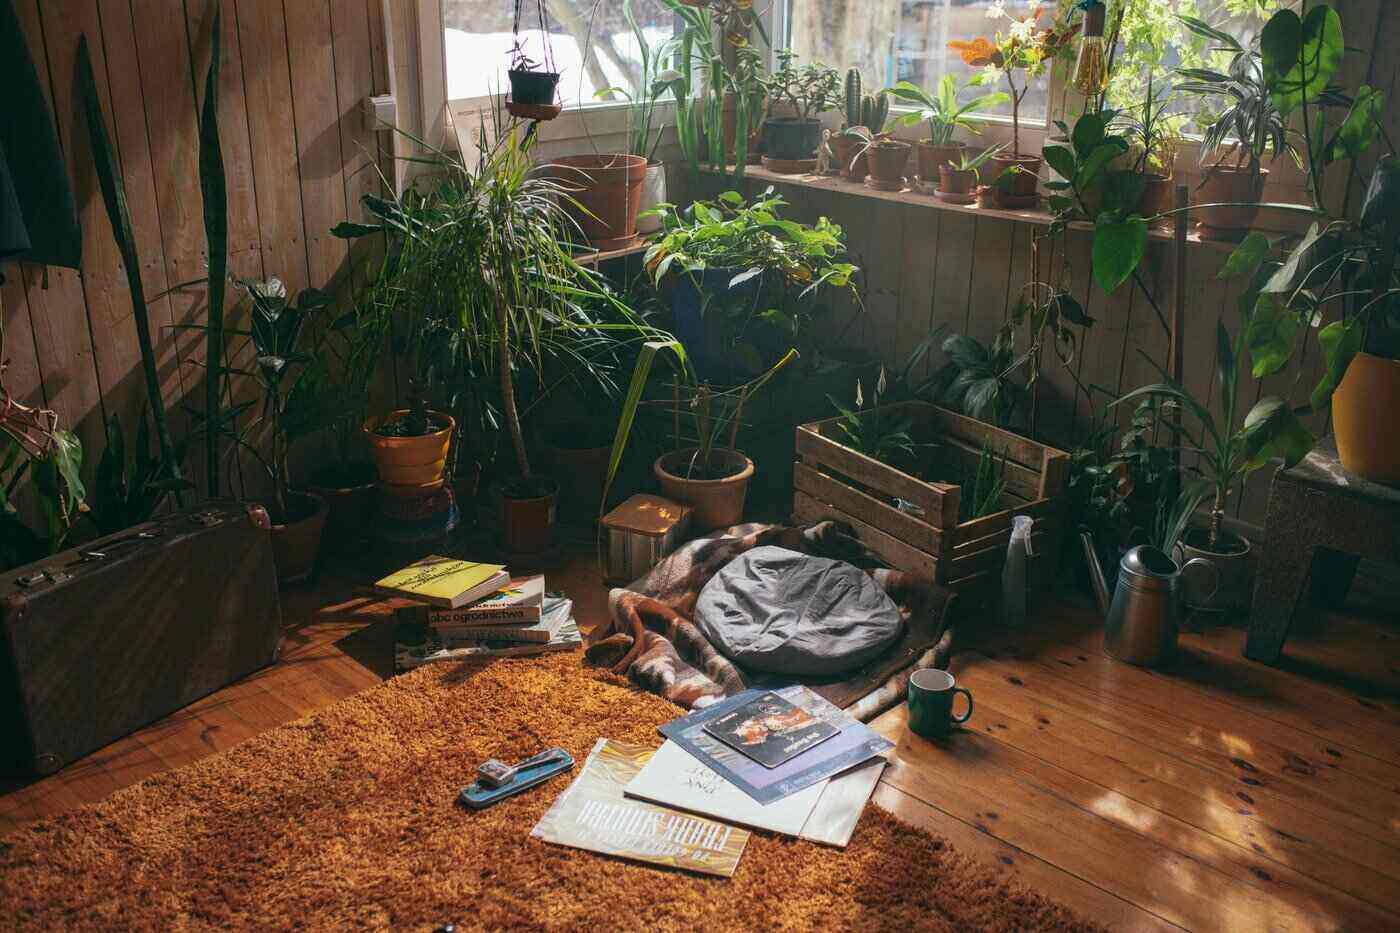 room corner filled with plants - create an indoor garden to beat the winter blues